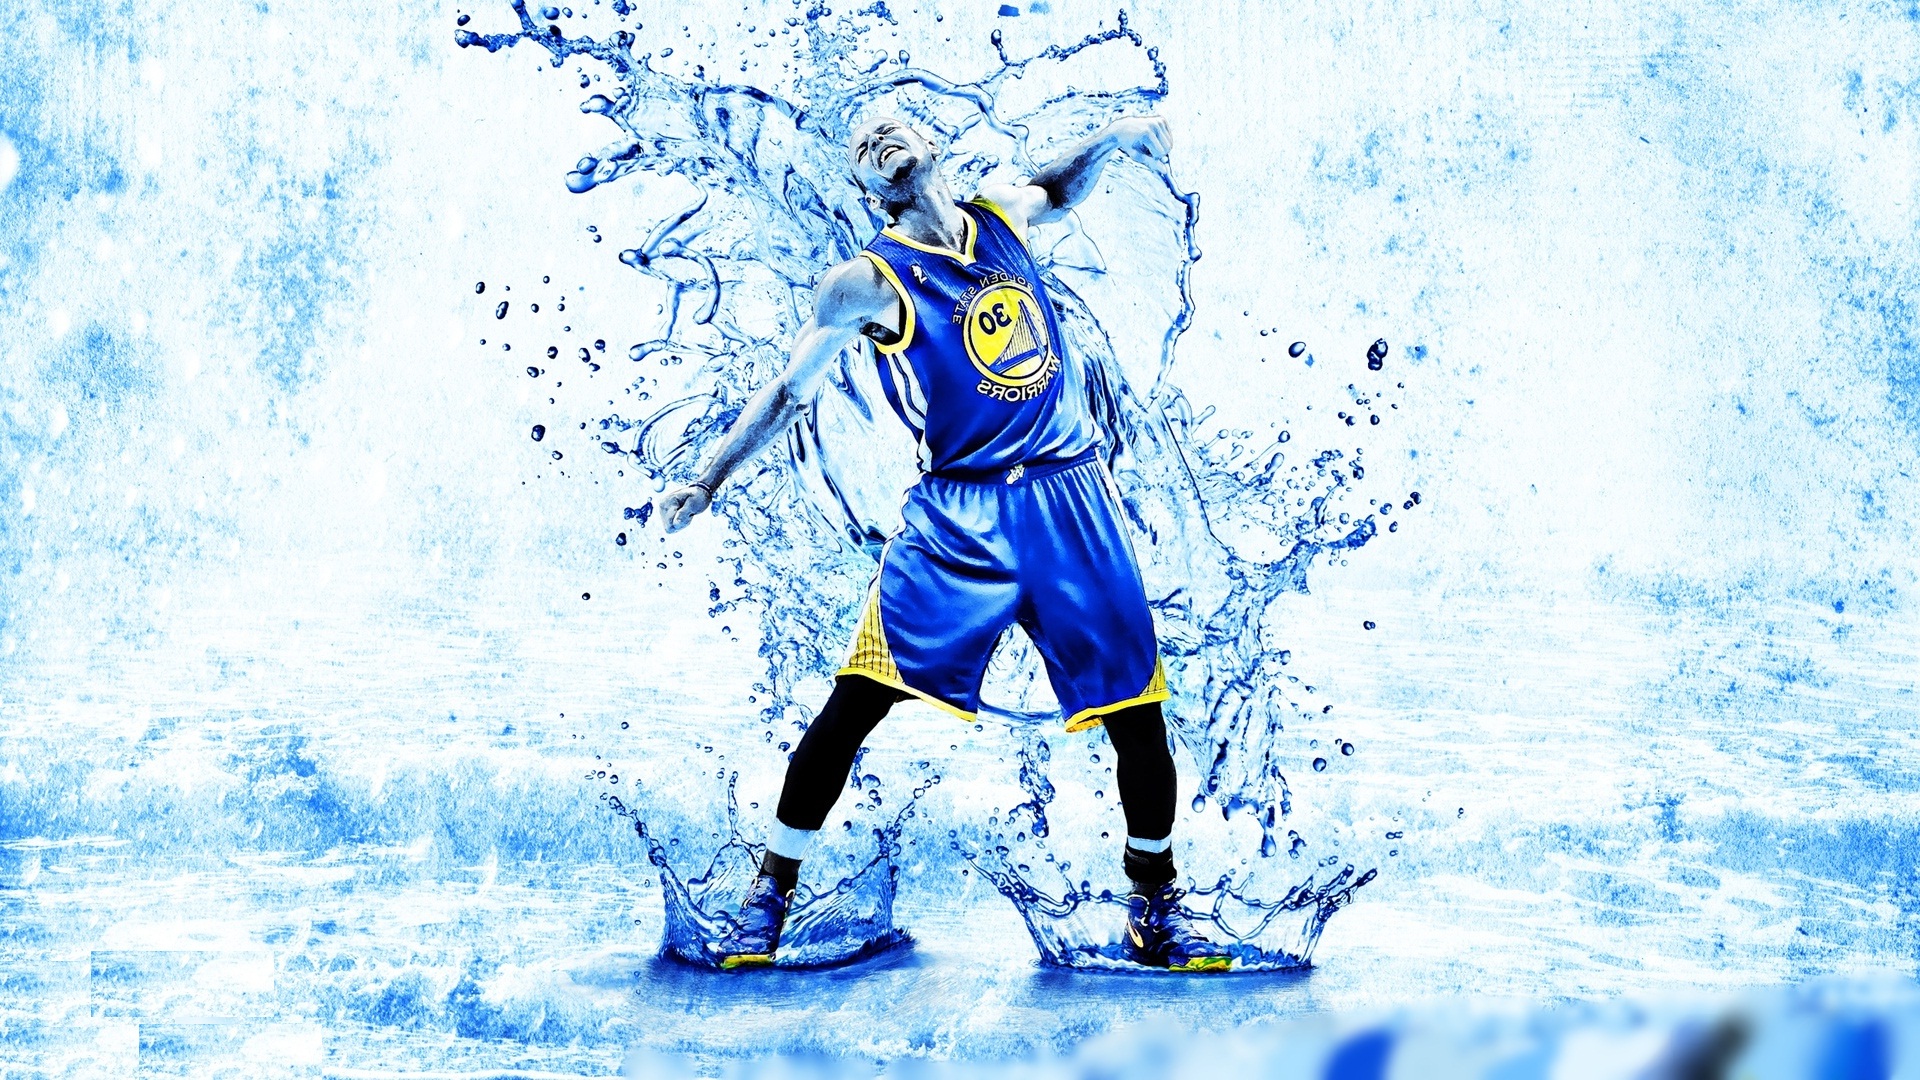 Stephen Curry Ps3 Background